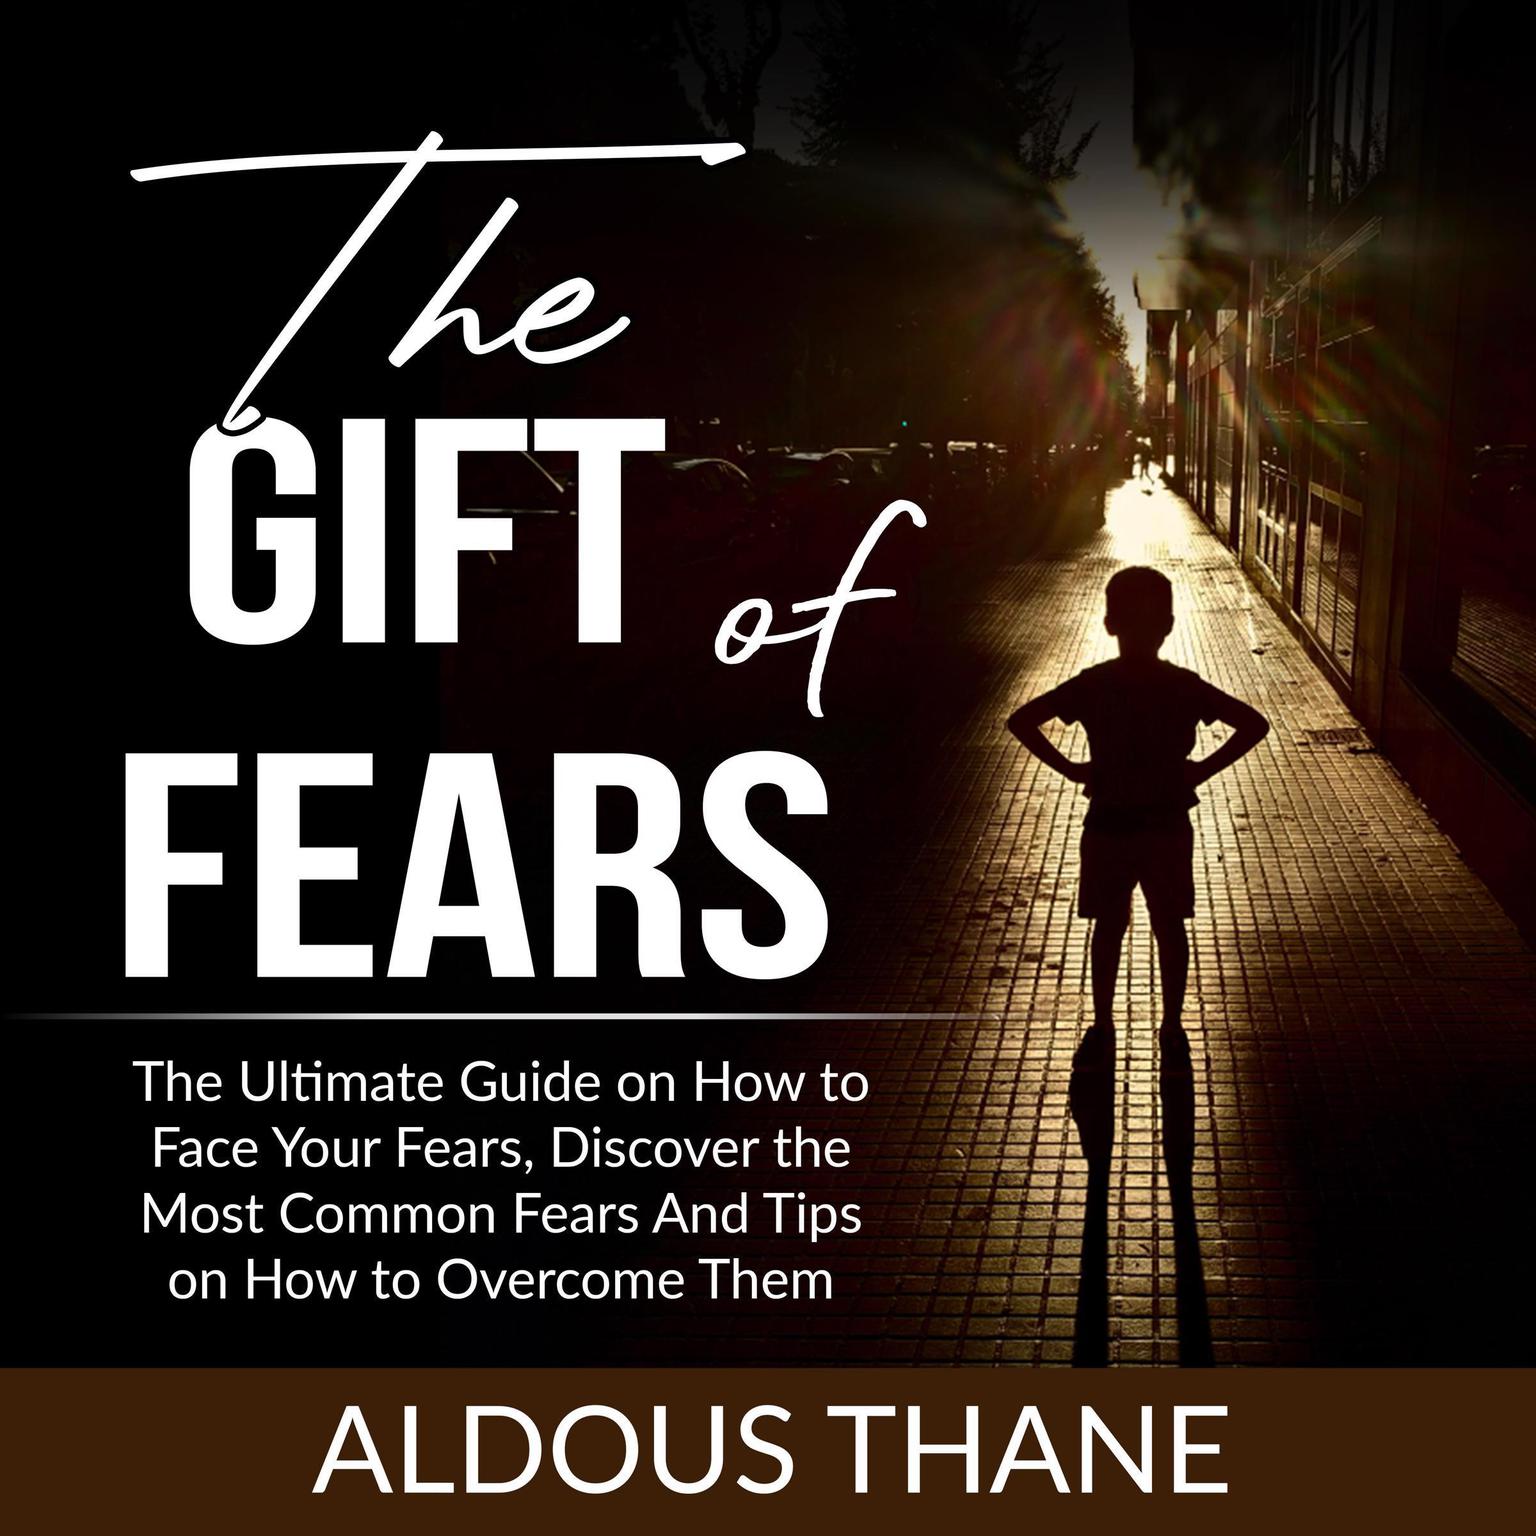 The Gift of Fears: The Ultimate Guide on How to Face Your Fears, Discover the Most Common Fears, And Tips on How to Overcome Them  Audiobook, by Aldous Thane